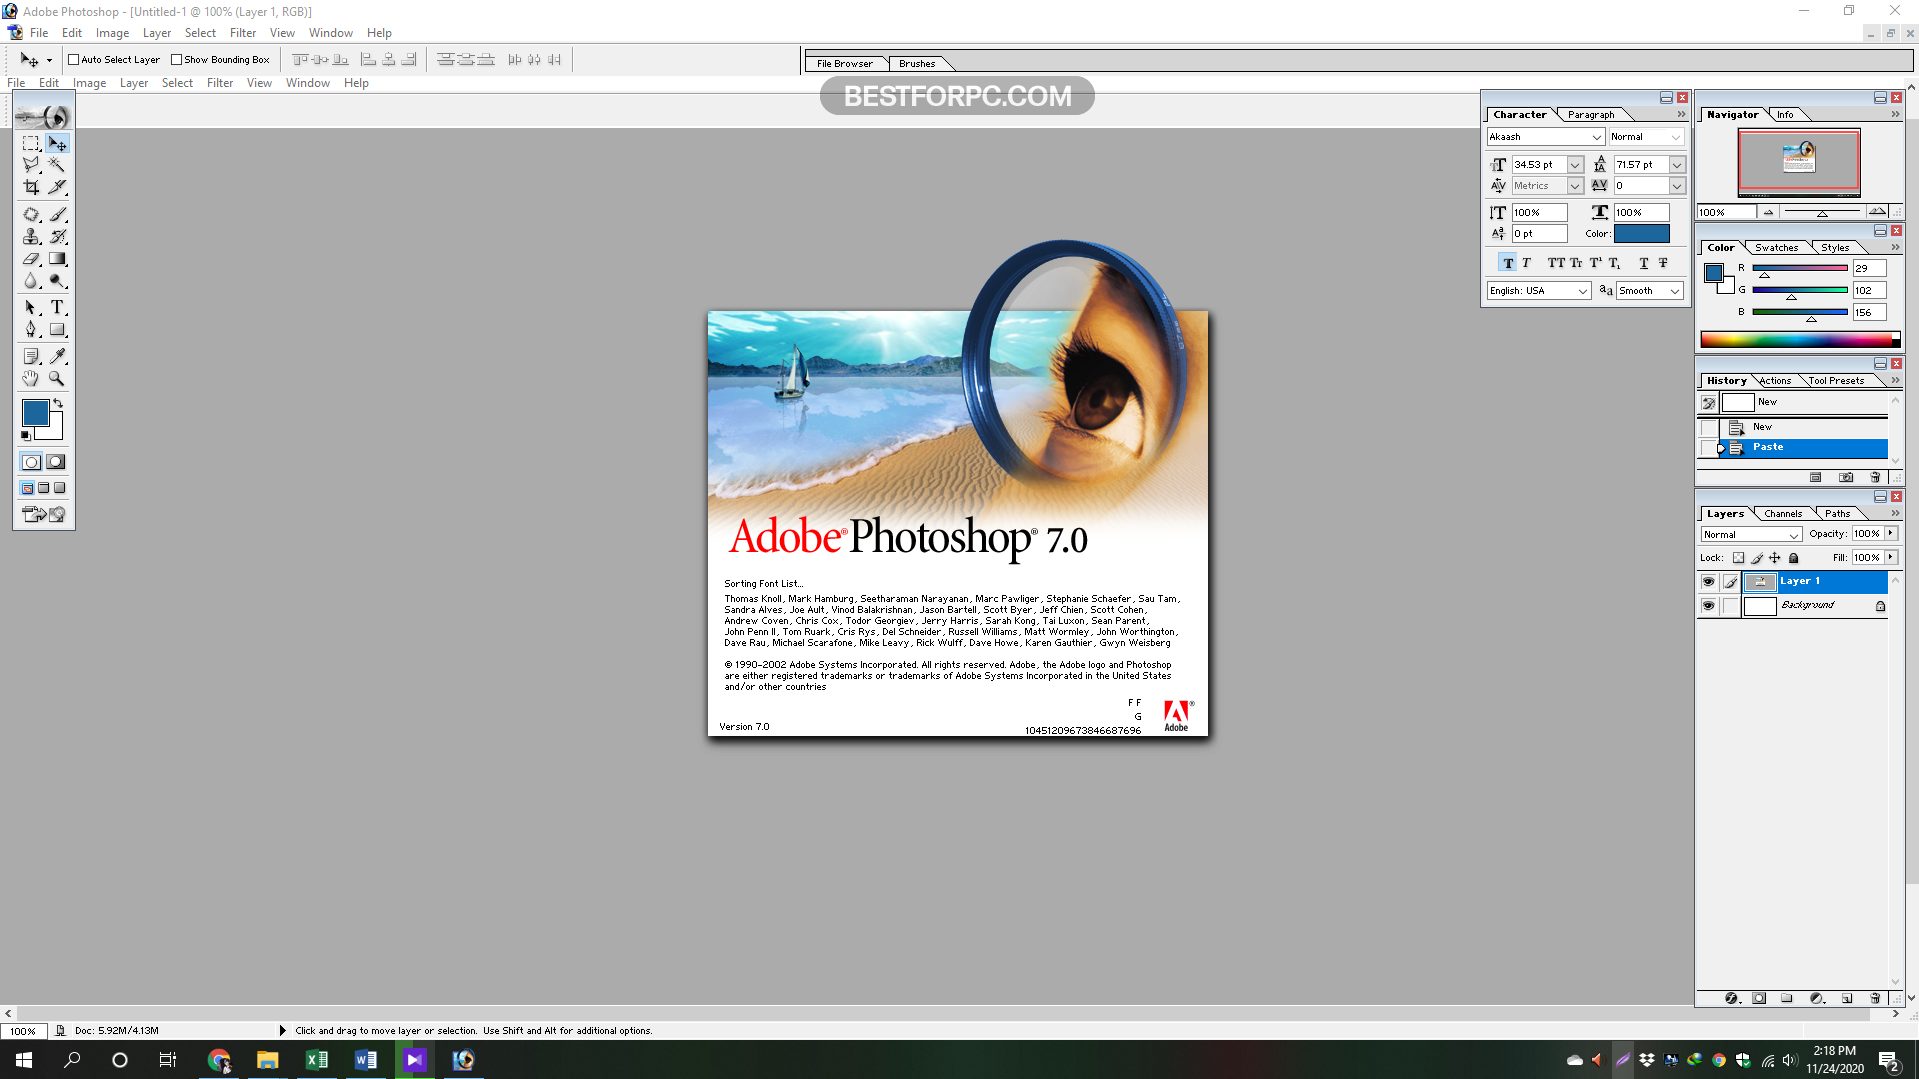 adobe photoshop 7.0 free download for windows 10 install